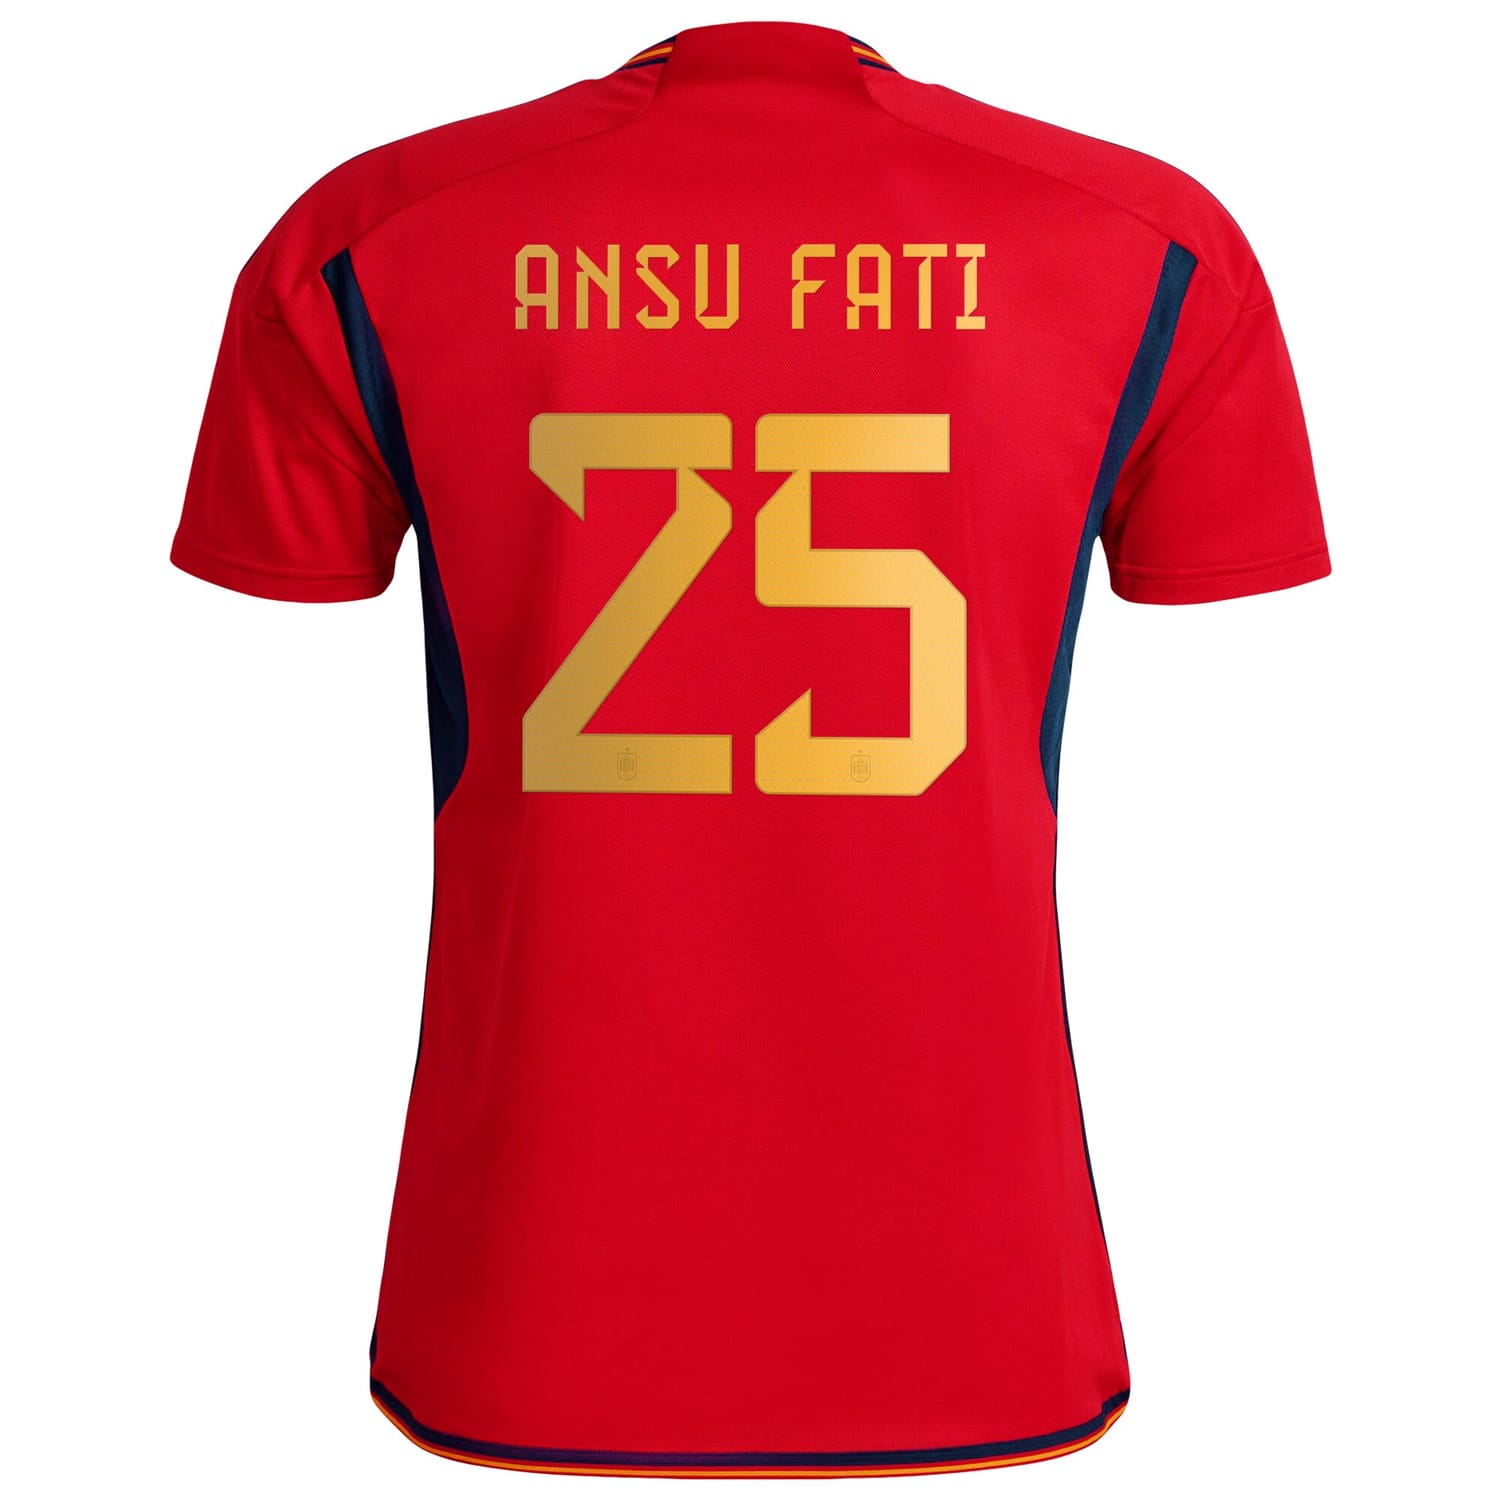 Spain National Team Home Jersey Shirt Red 2022-23 player Ansu Fati printing for Men